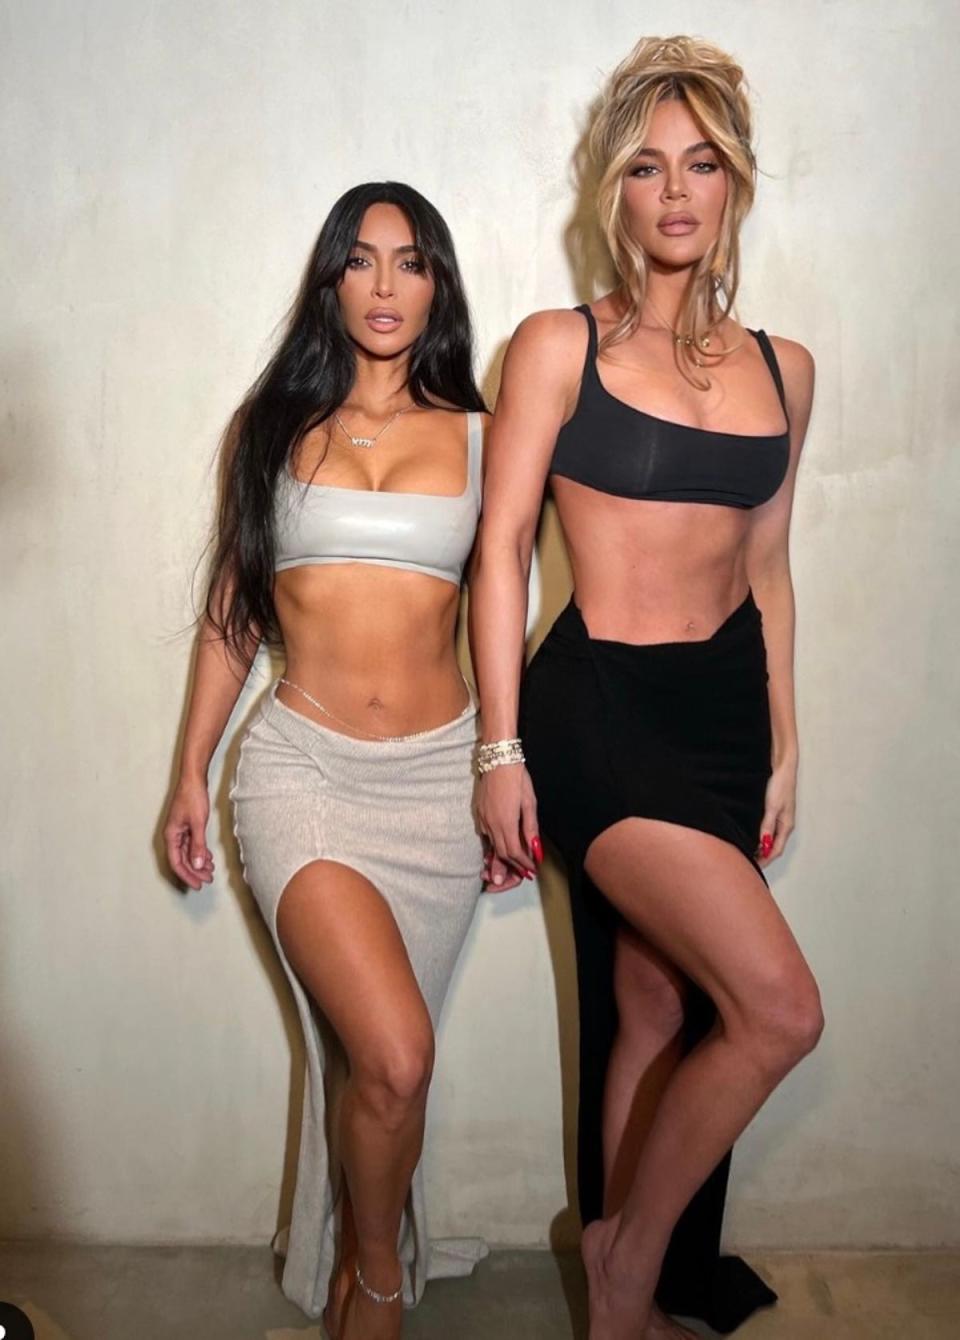 Sisters Kim and Khloe Kardashian have also been accused of photoshopping photos in the past (Khloe Kardashian/Instagram)